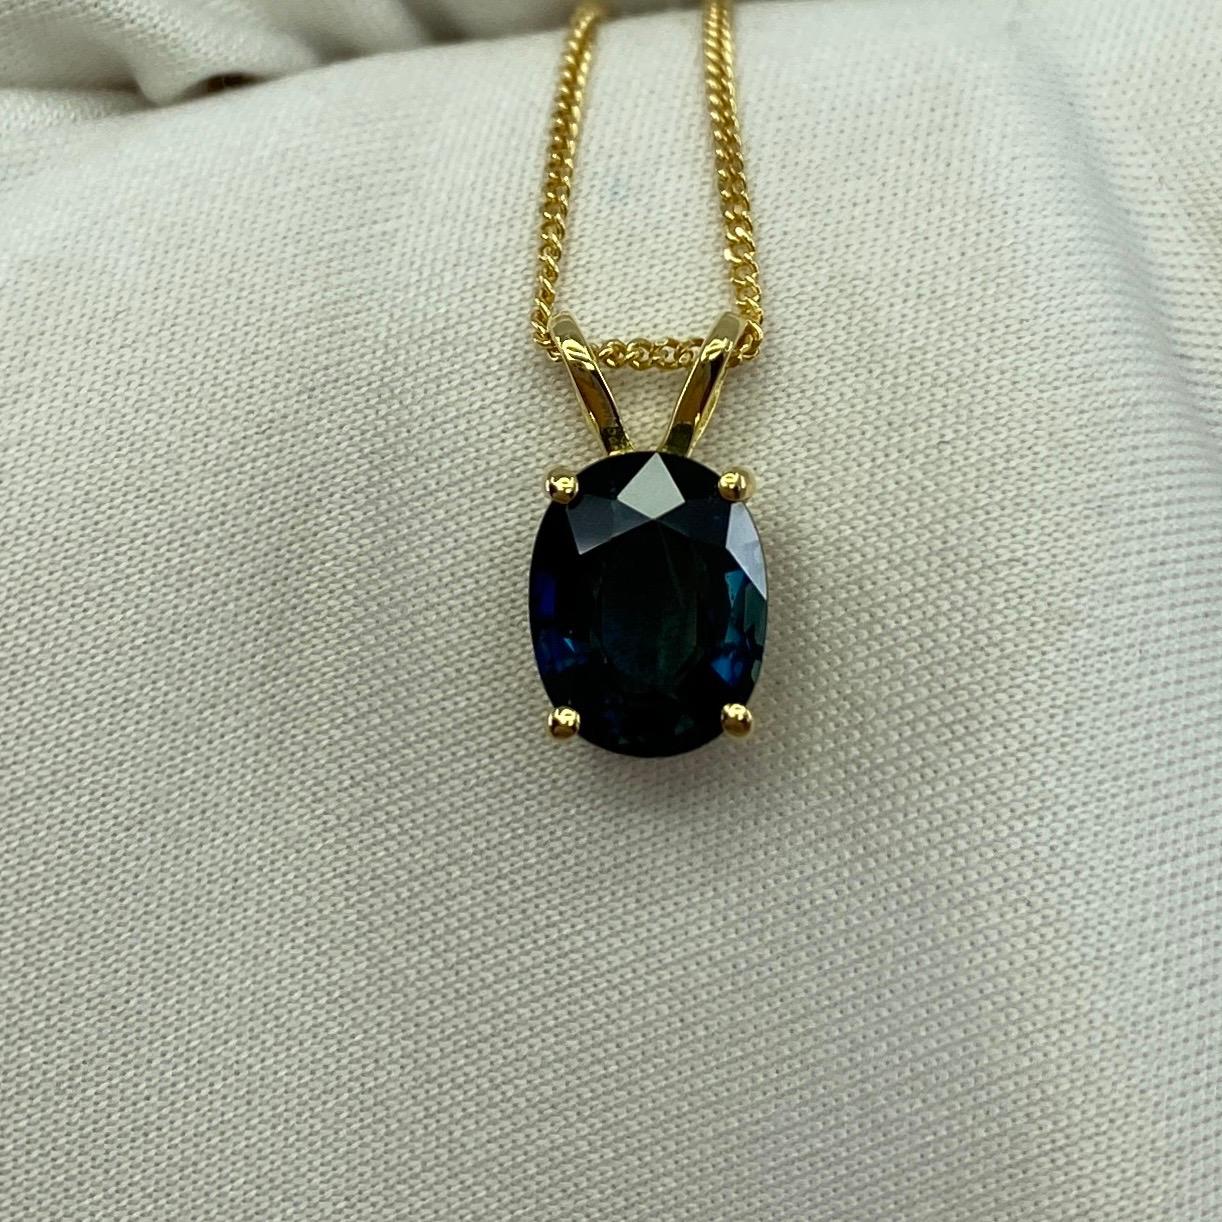 Fine Deep Green Blue Australian Sapphire 18k Yellow Gold Pendant.

2.40 Carat oval cut sapphire with a stunning deep green blue colour and very good clarity. A clean stone with only some small natural inclusions visible when looking closely. 

This